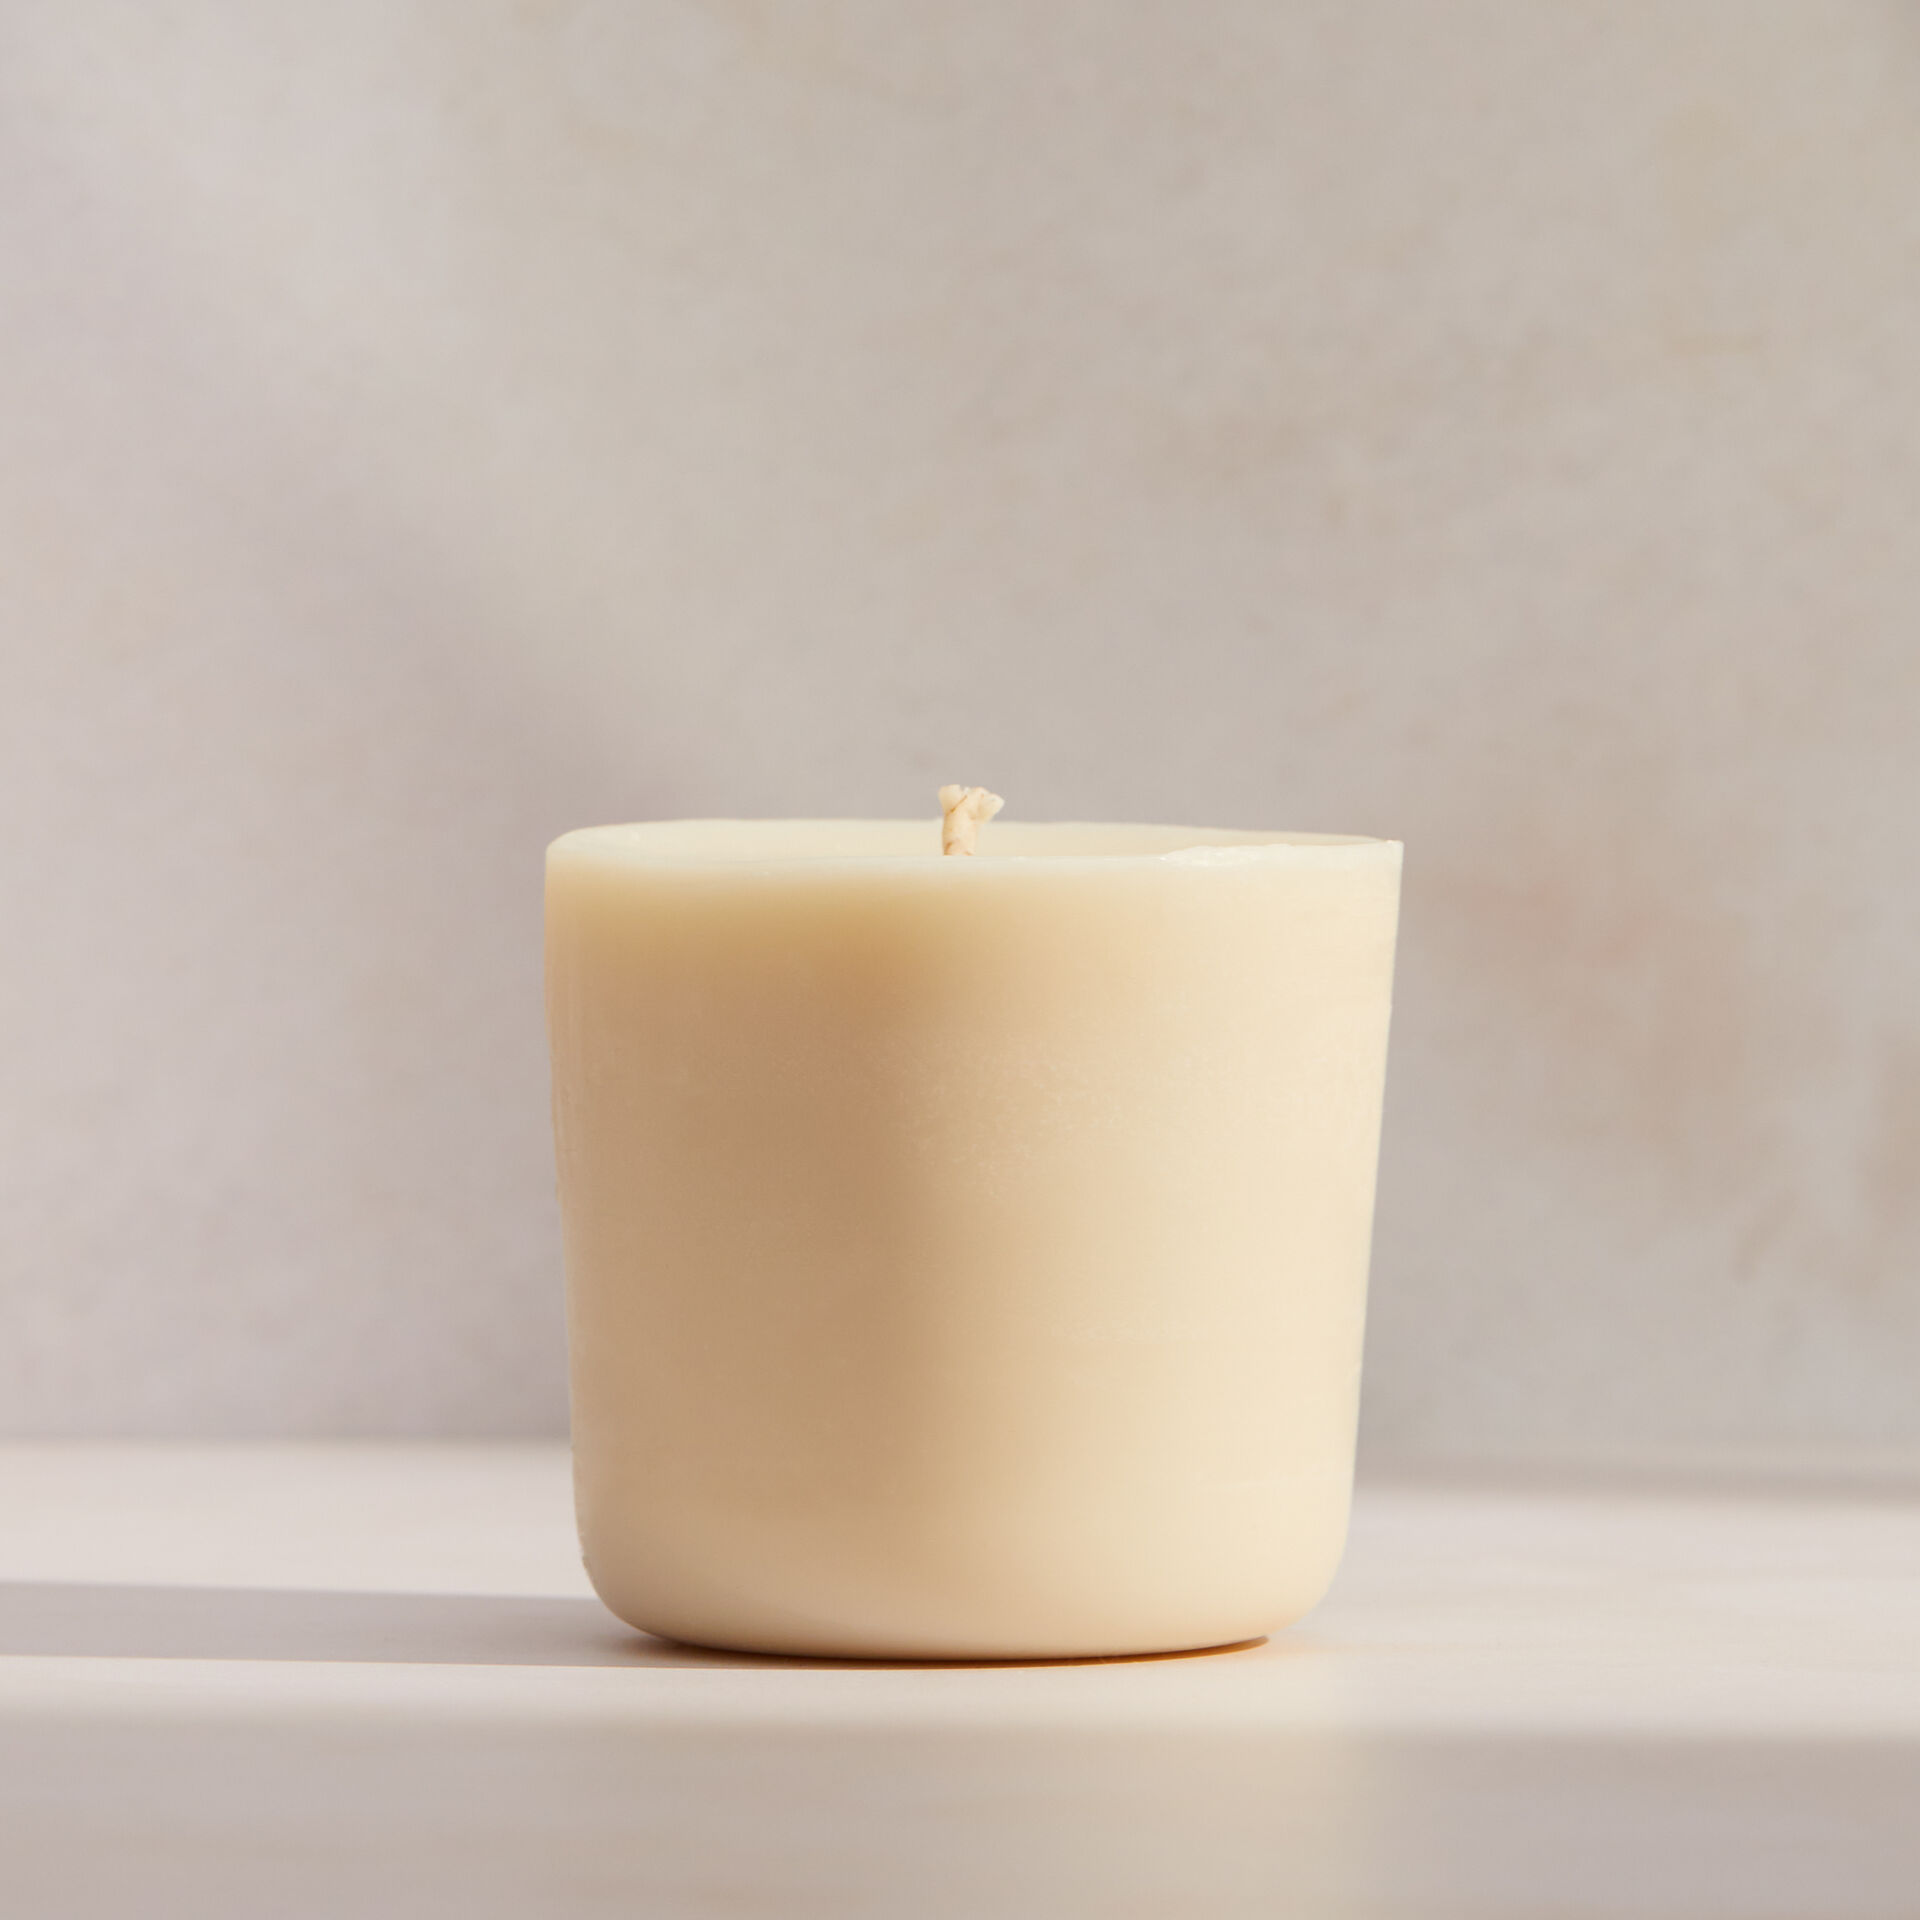 ${product-id}-Black Pepper And Pomegranate Scented Signature Candle Refill-Black Pomegranate-${view-type}